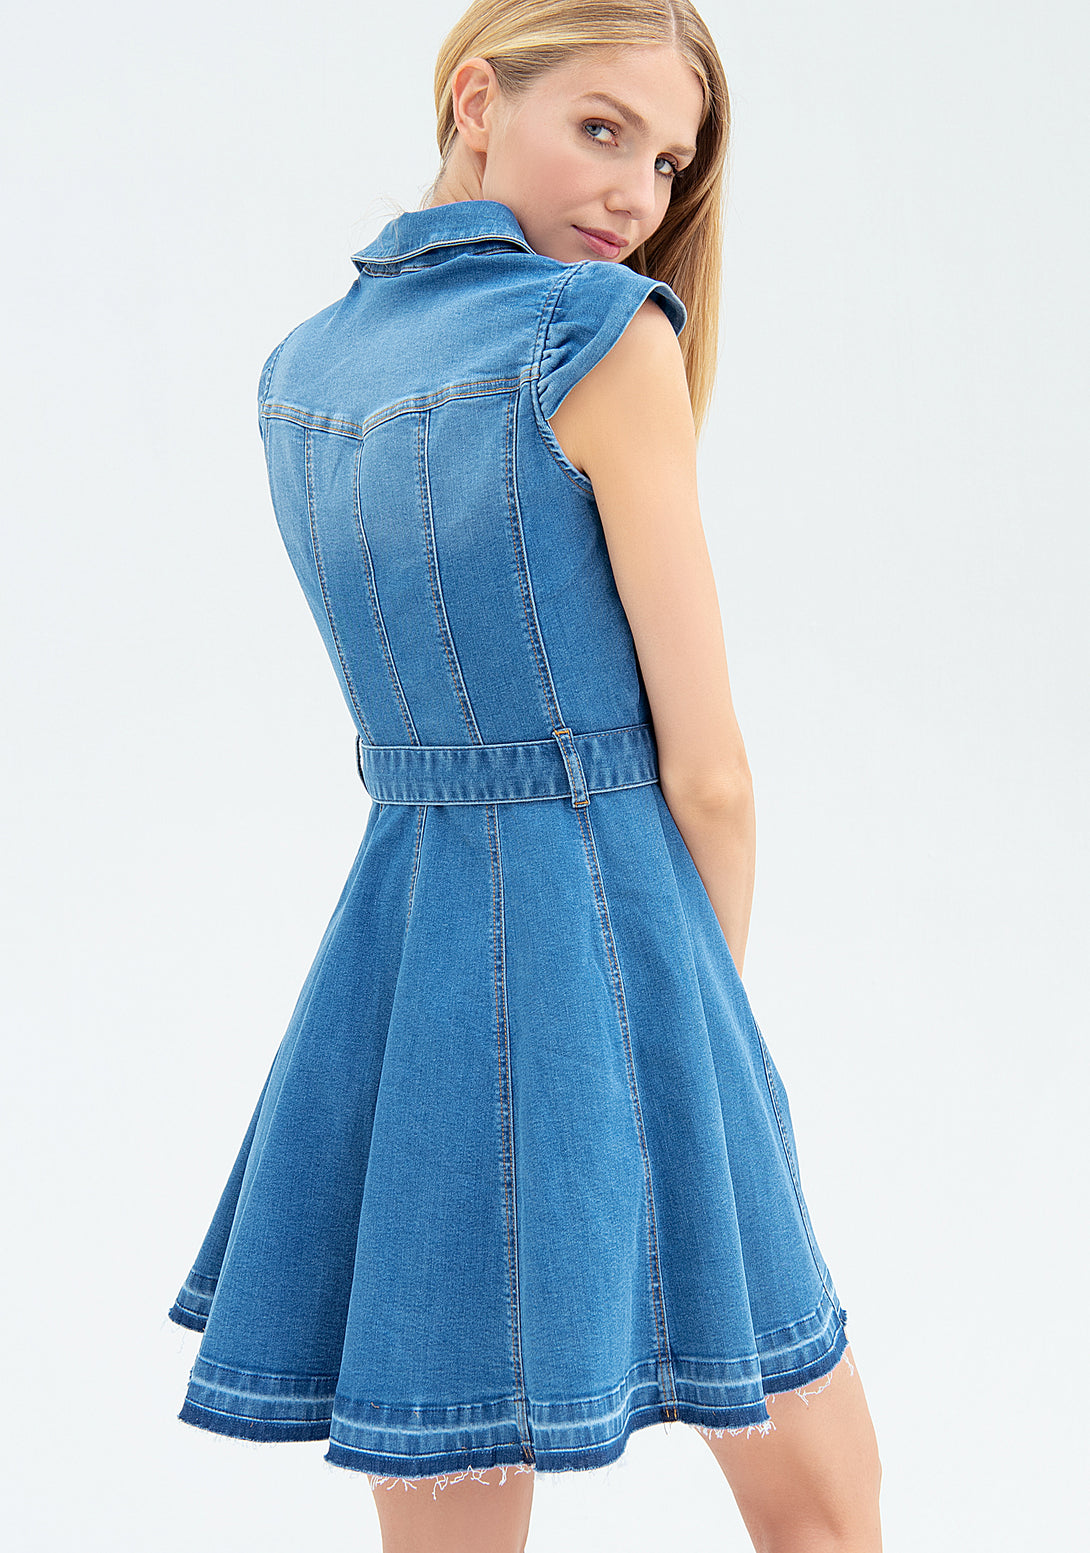 Chemisier dress with no sleeves made in denim with middle wash